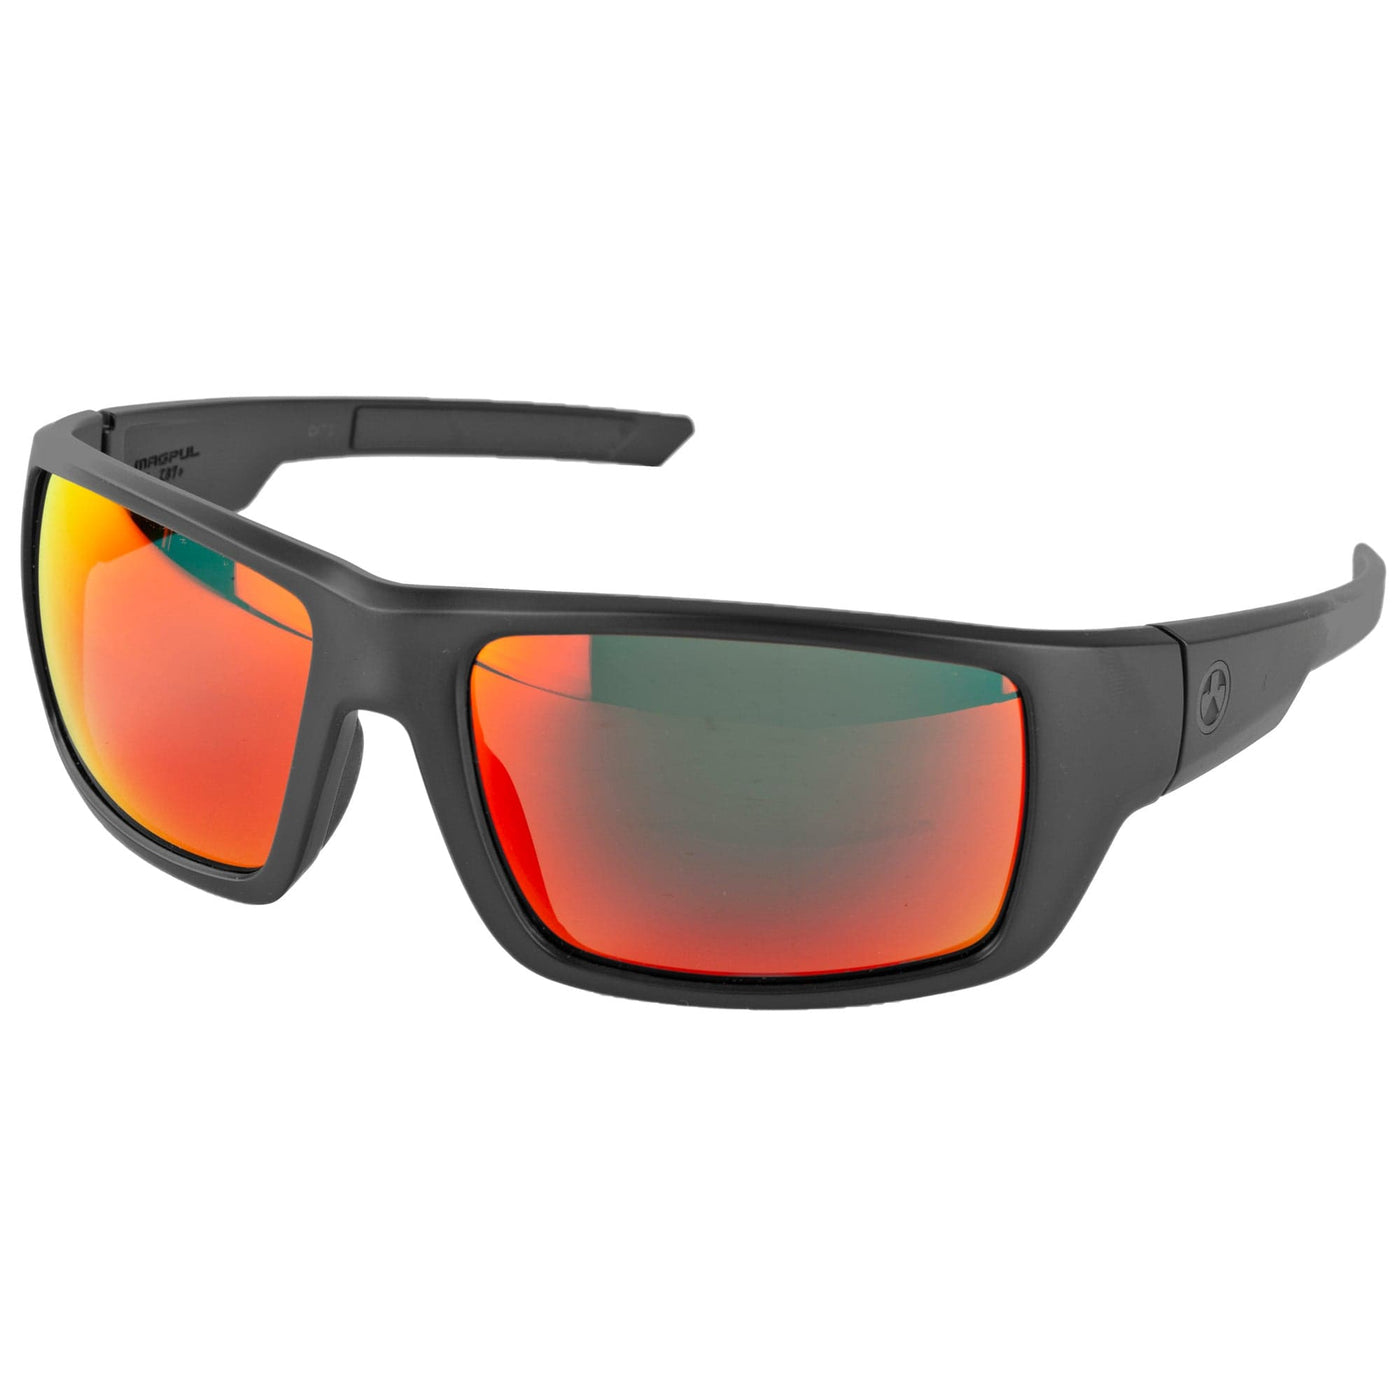 MAGPUL INDUSTRIES CORP Magpul Industries Corp Apex, Magpul Mag1130-1-001-1140 Apex Eyewear Blk/gry/red Magpul Apex Polarized Black Frm Gry/red Shooting